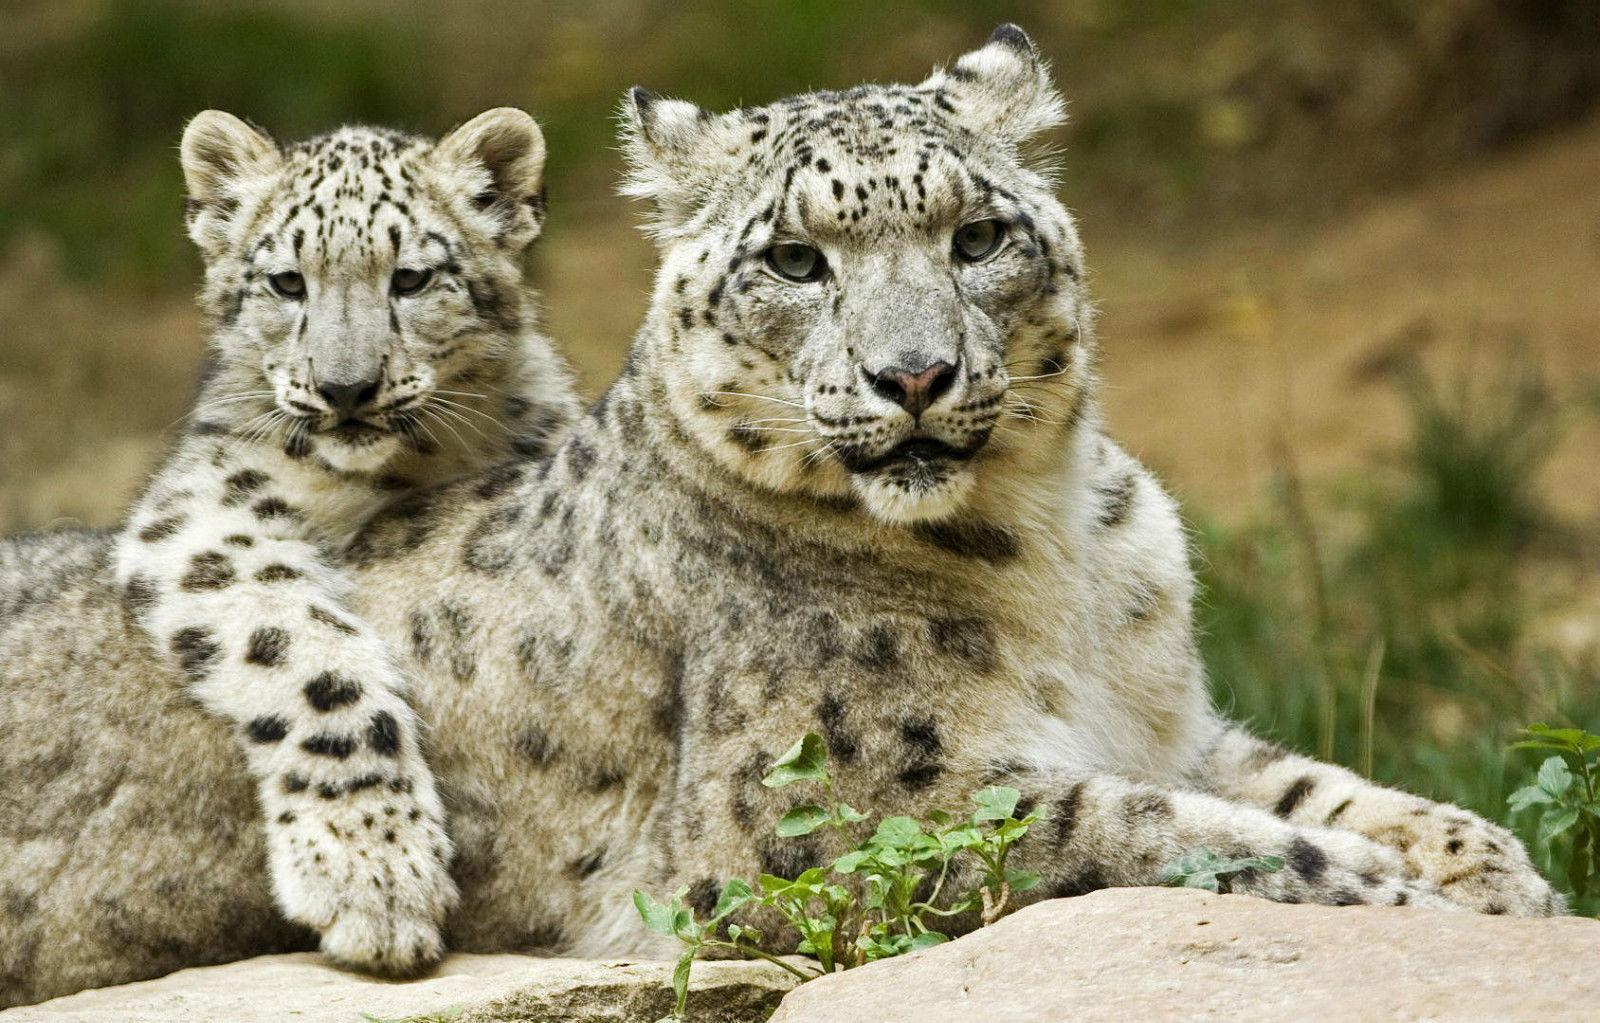 Snow Leopard Cub Sitting With Its Mother Art Silk Print Poster 24x36inch60x90cm 089 From Chuy $10.93